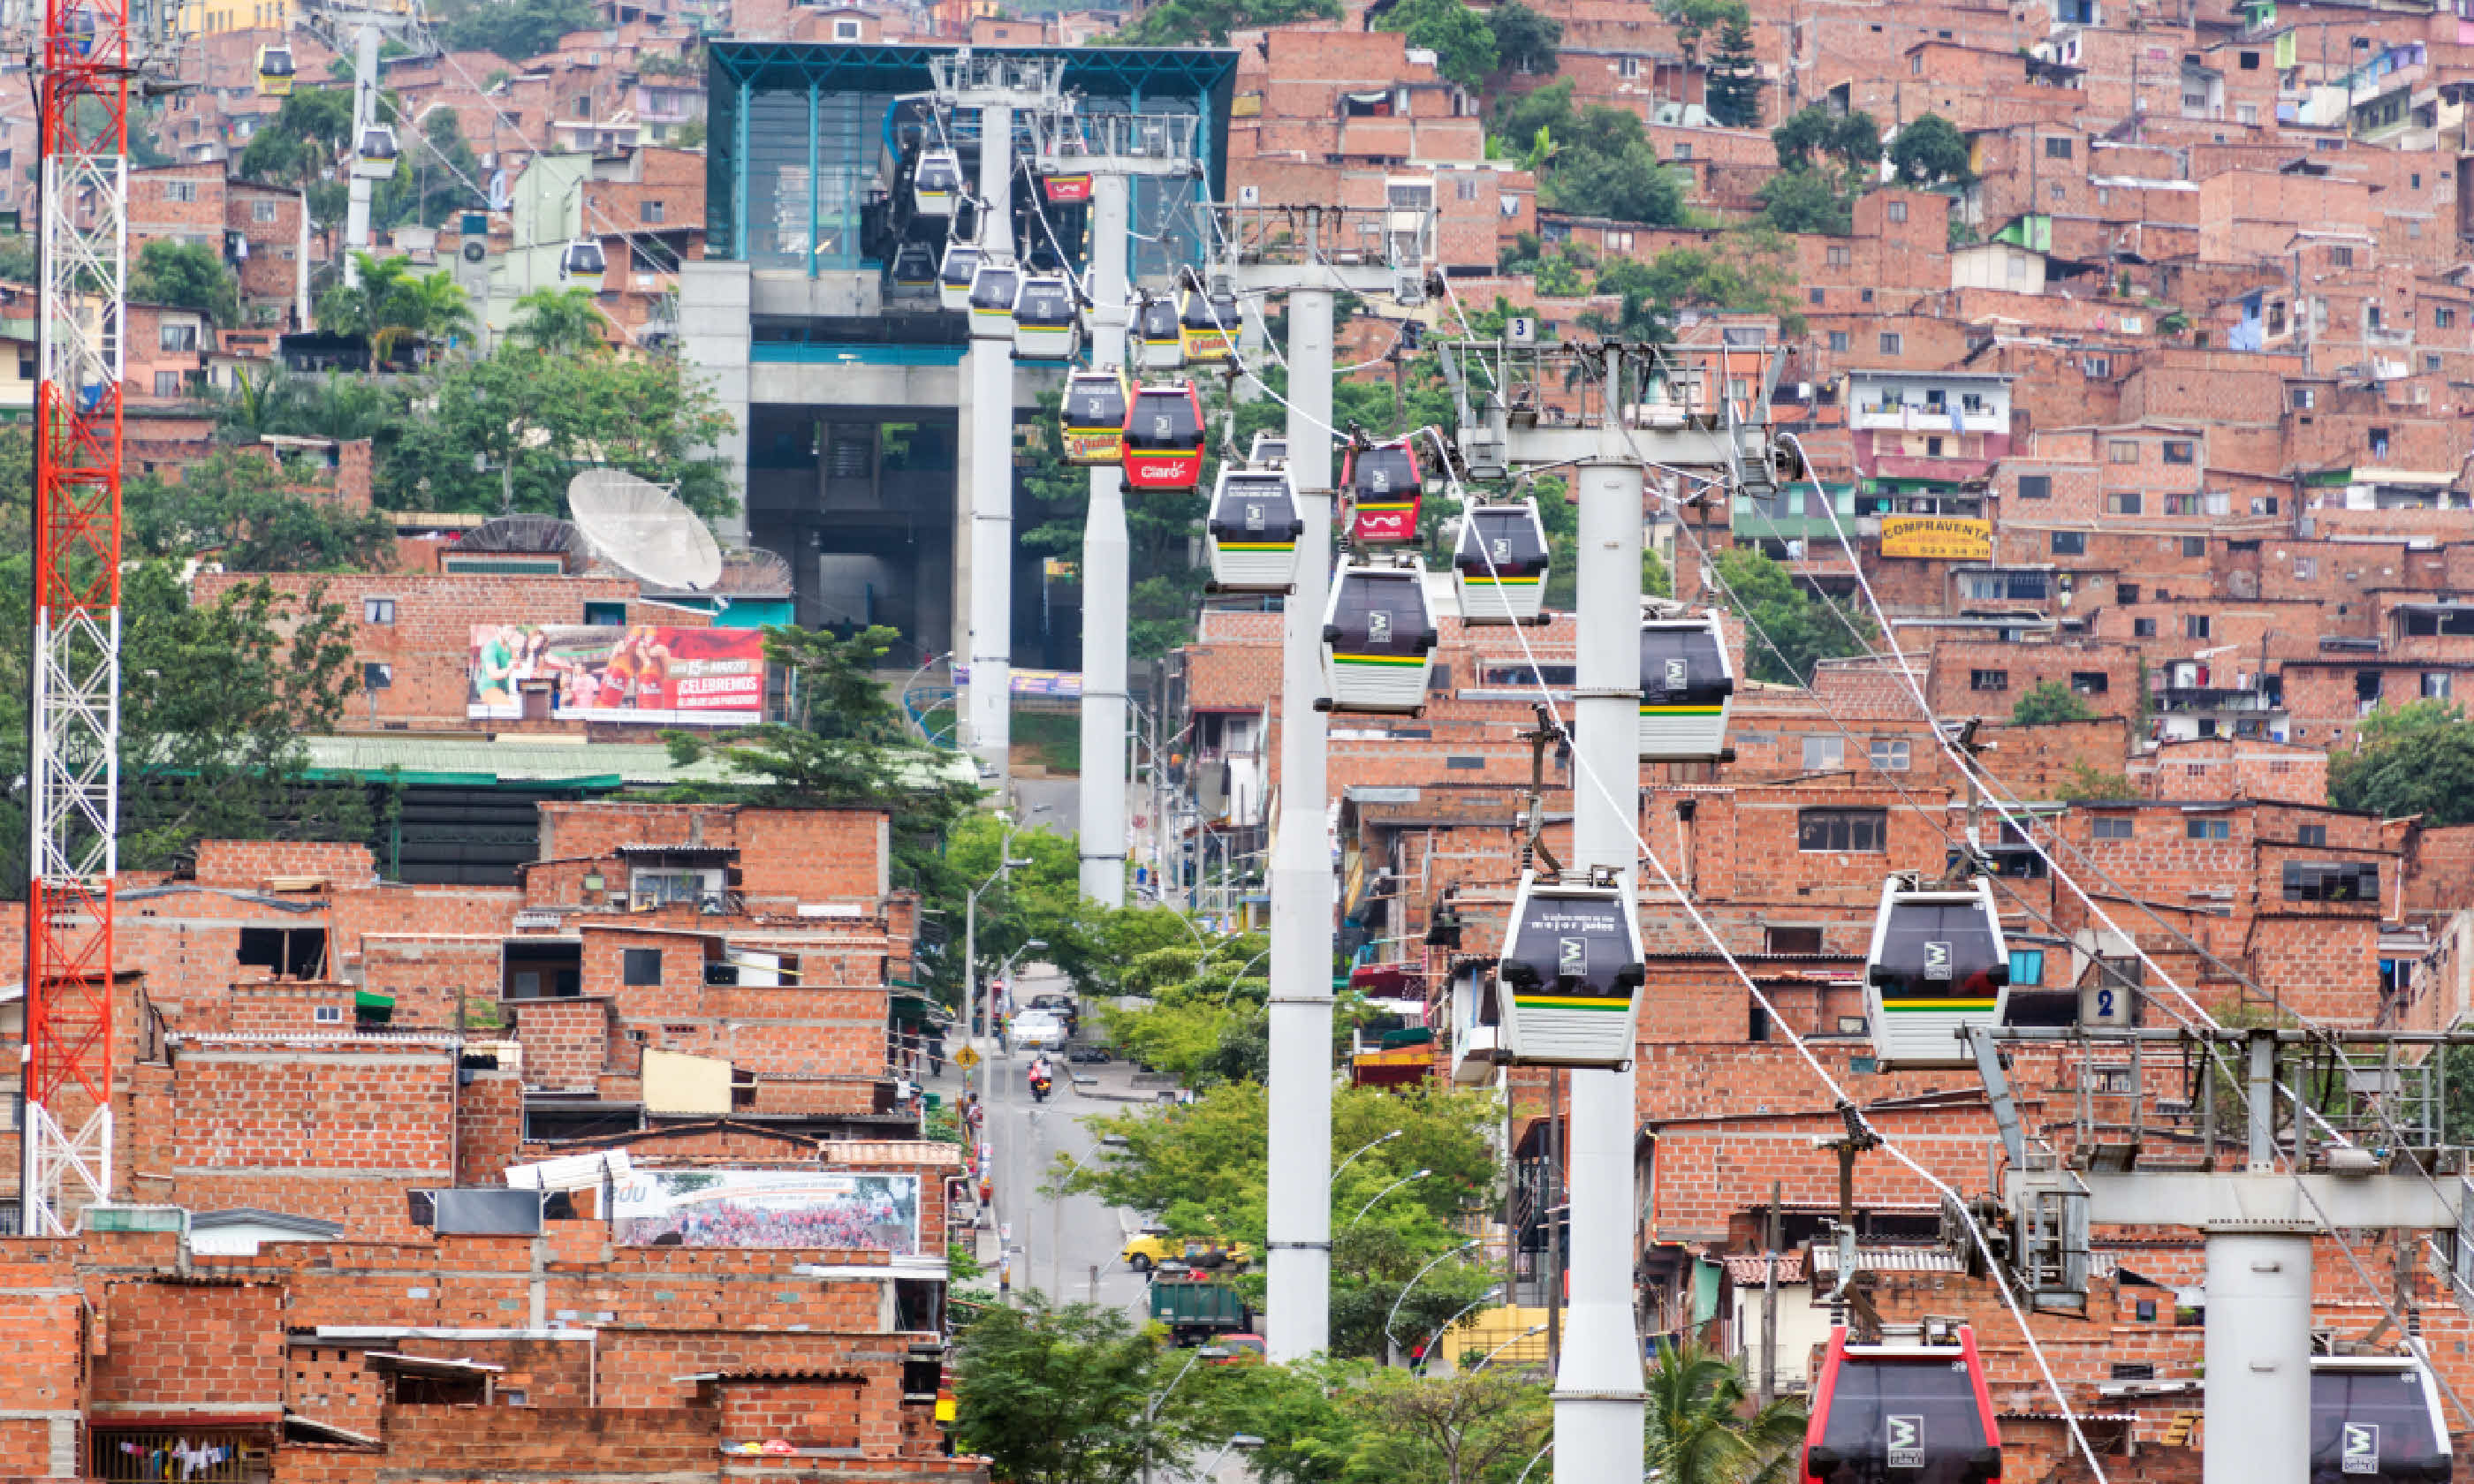 Metrocable cars arriving at a station in Medellin, Colombia (Shutterstock)